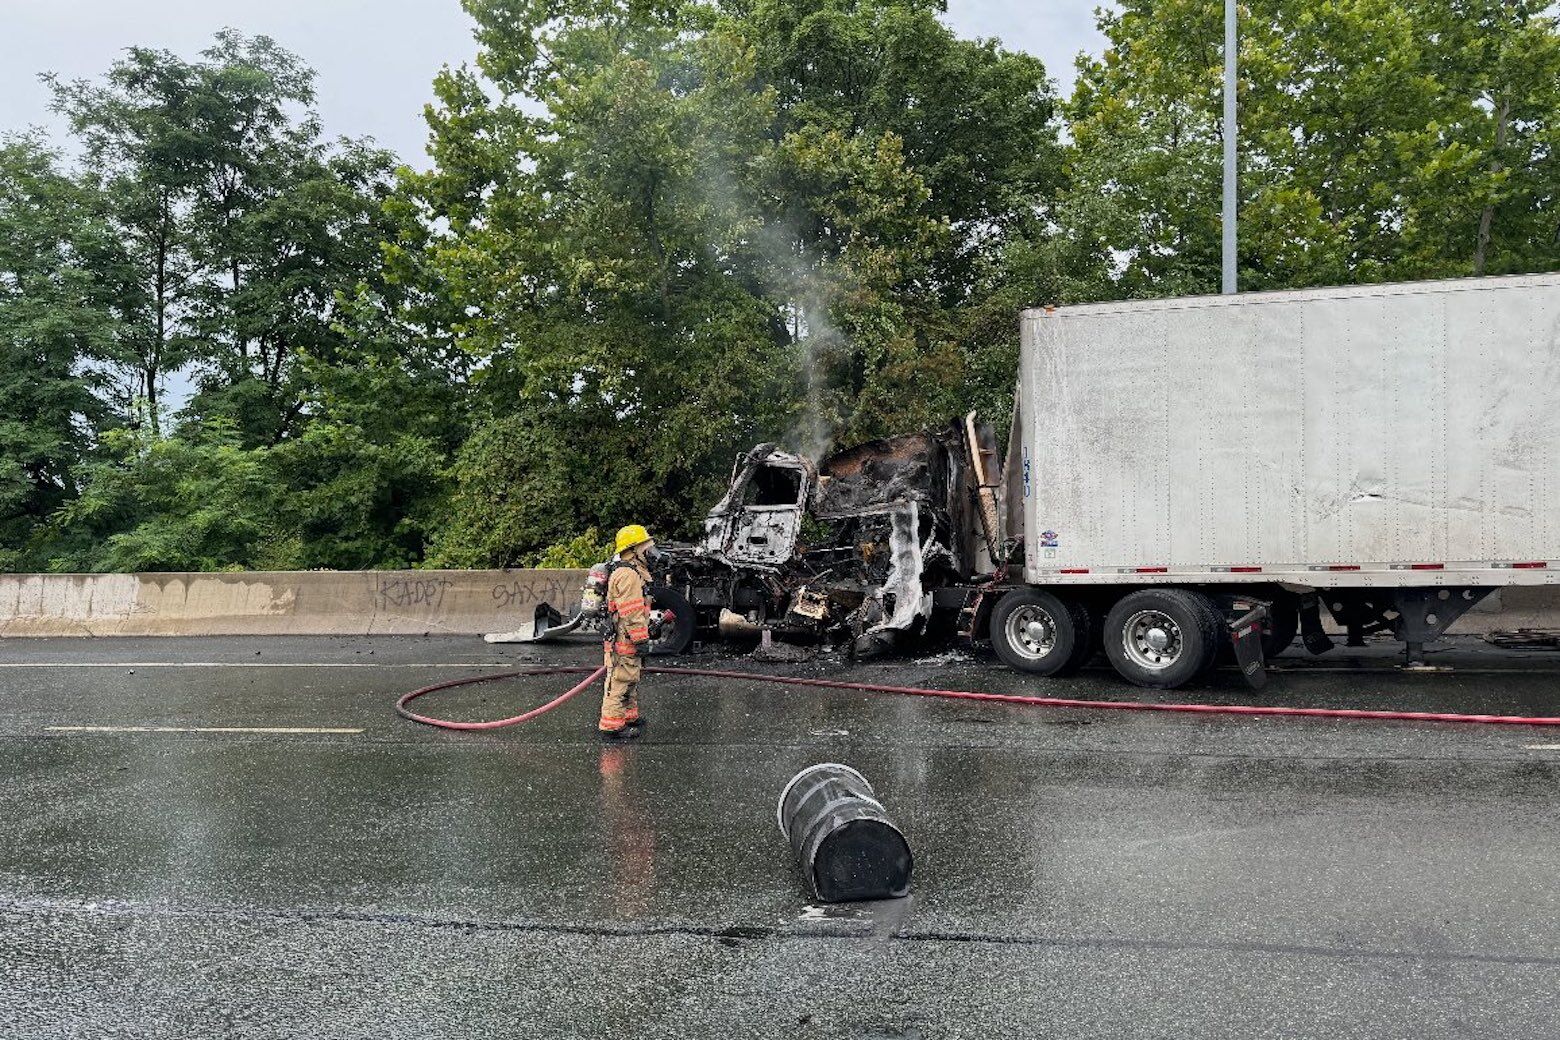 Crews respond to a tractor-trailer and hazardous materials situation